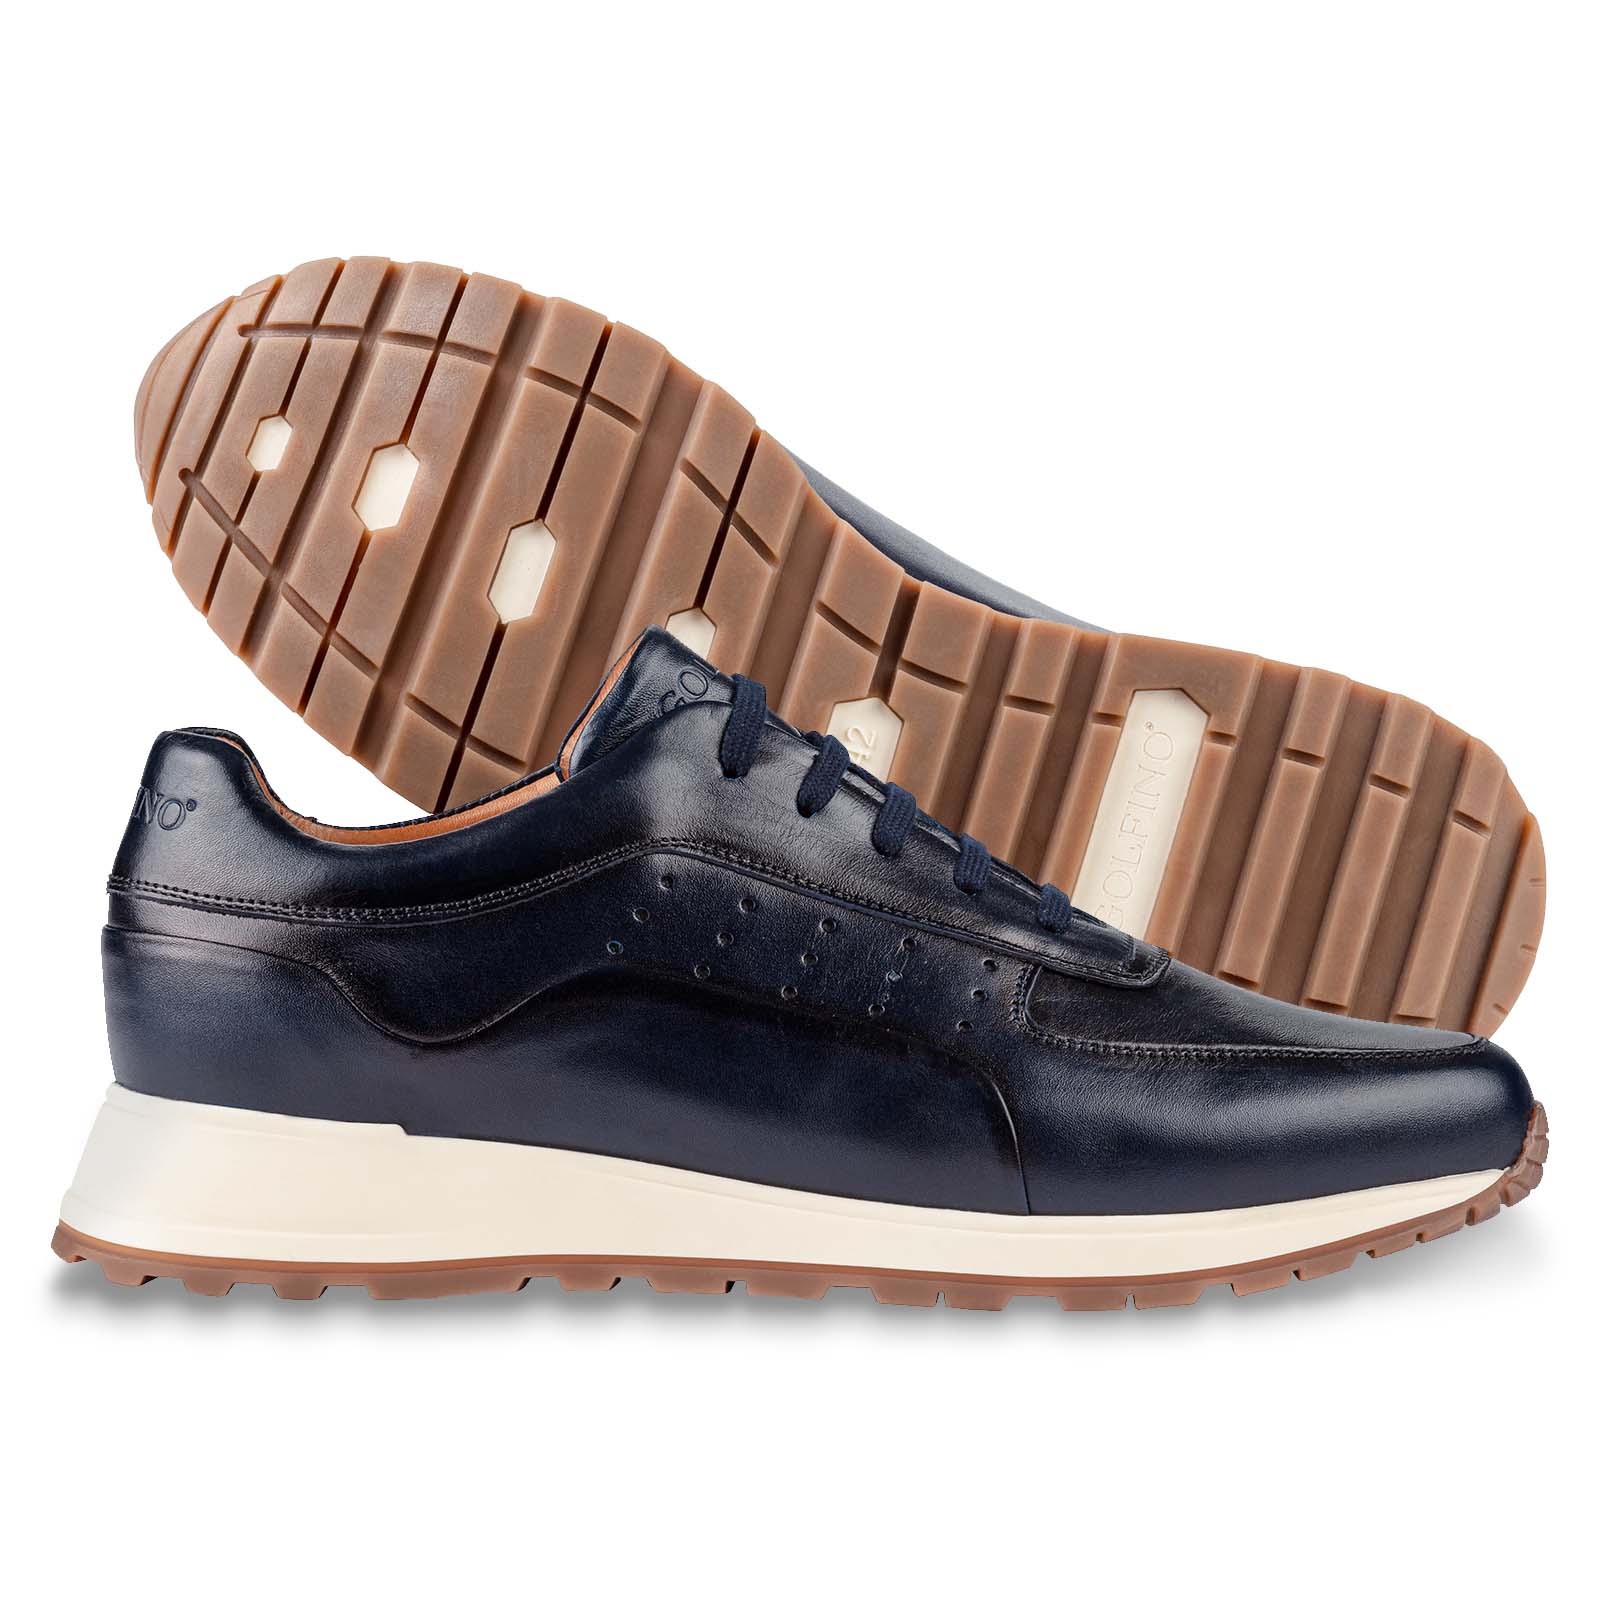 Men's golf shoes with a sporty touch